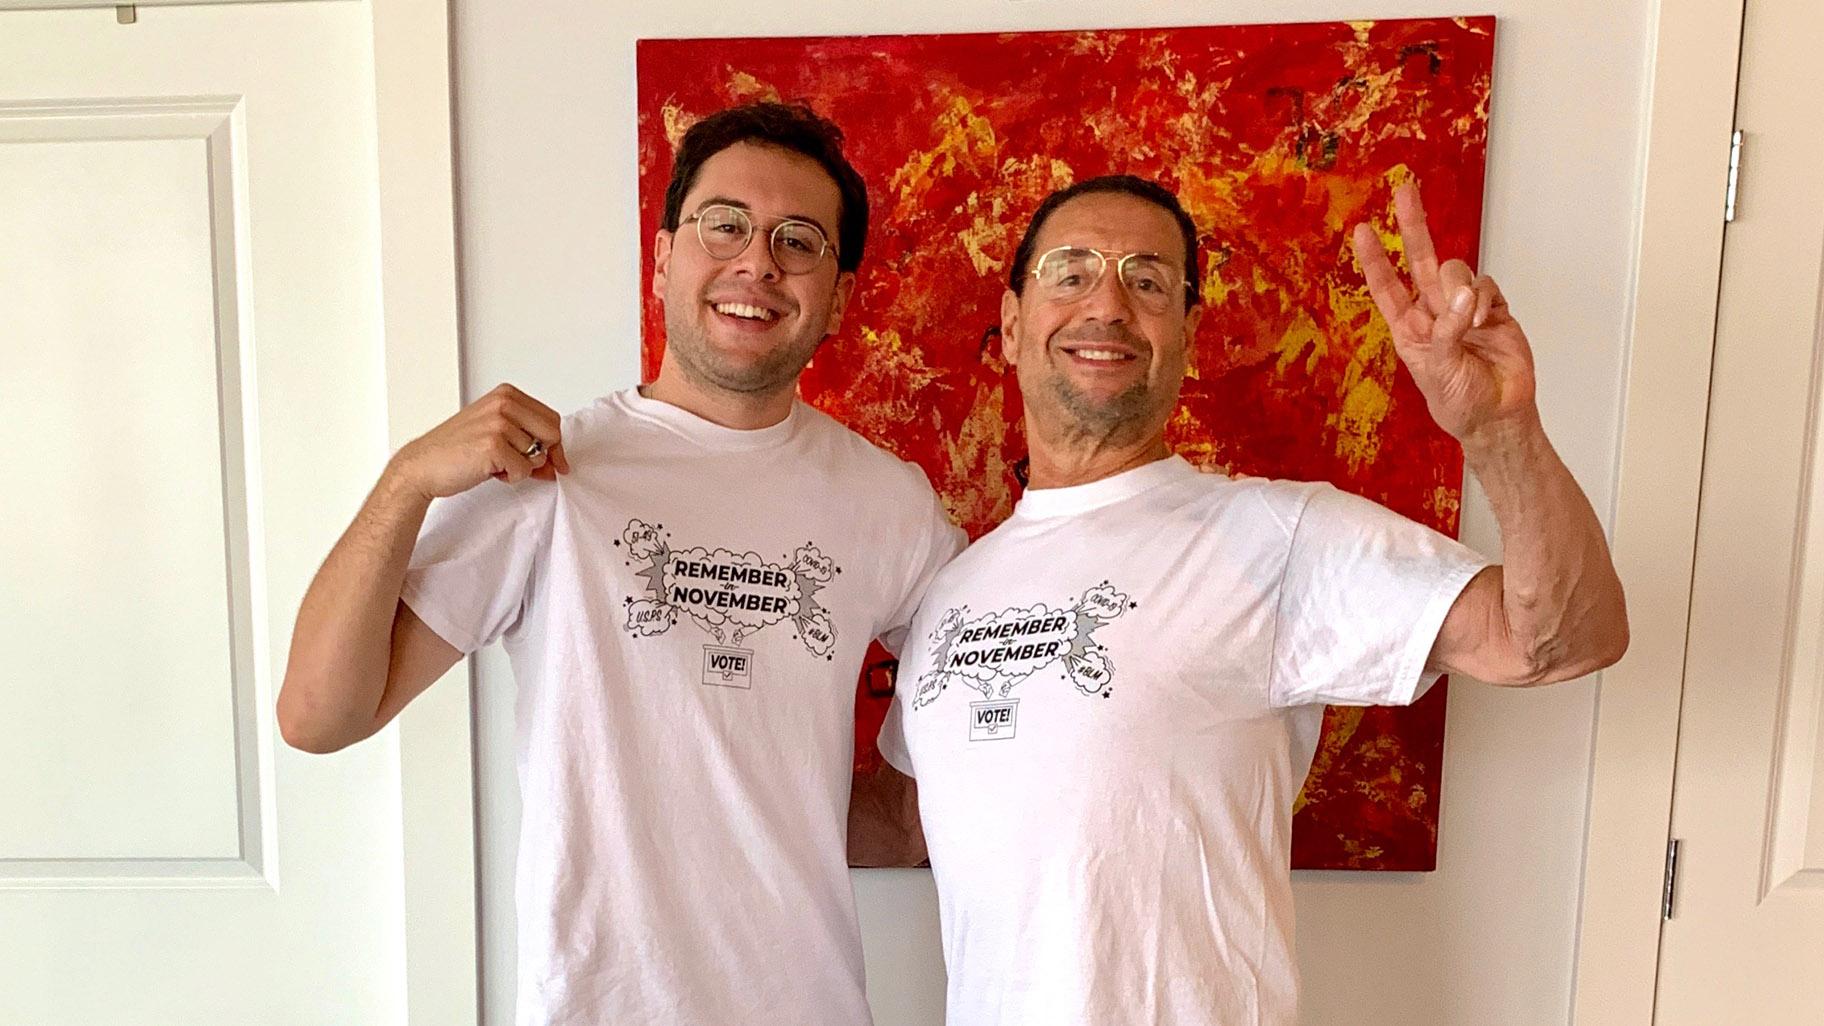 Horace Nowell III, left, and his father have their first in-person visit during the pandemic and show off their T-shirts. In the background is a painting the two made together. (Courtesy Horace Nowell)